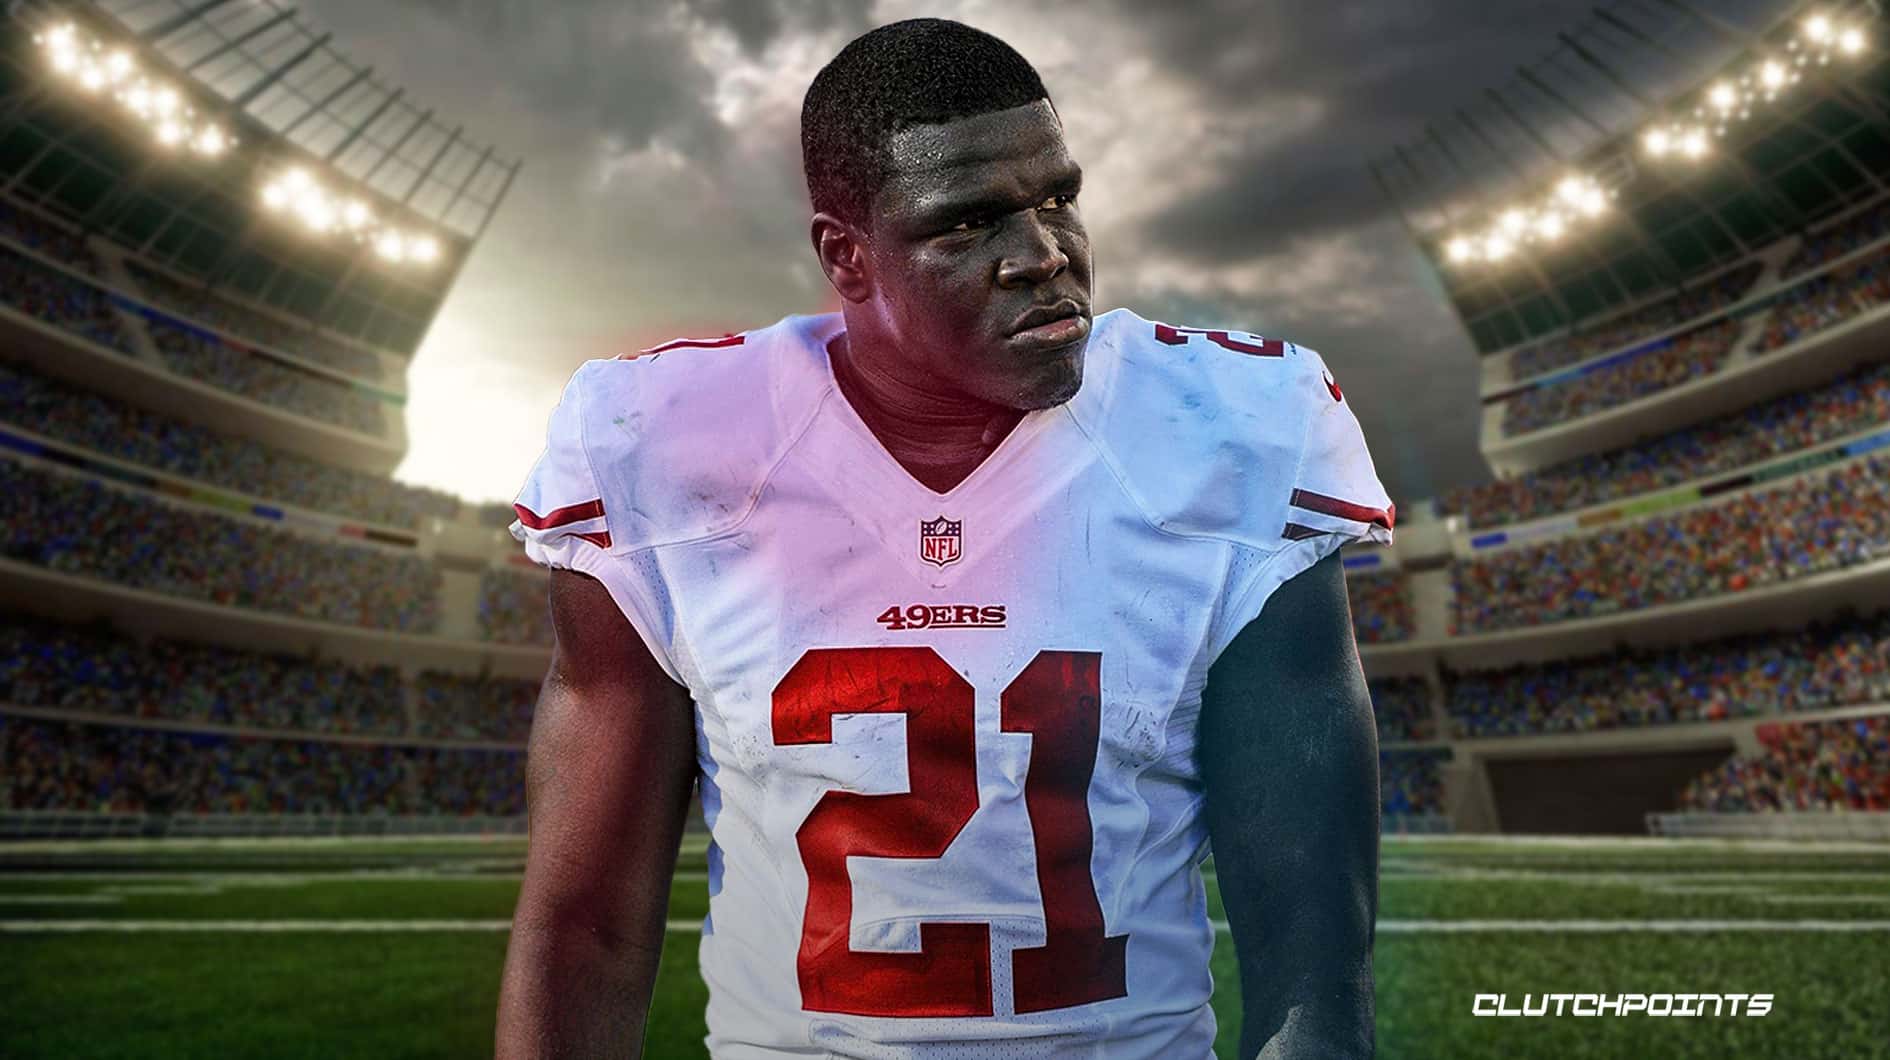 Former NFL RB Frank Gore faces simple assault charge in New Jersey